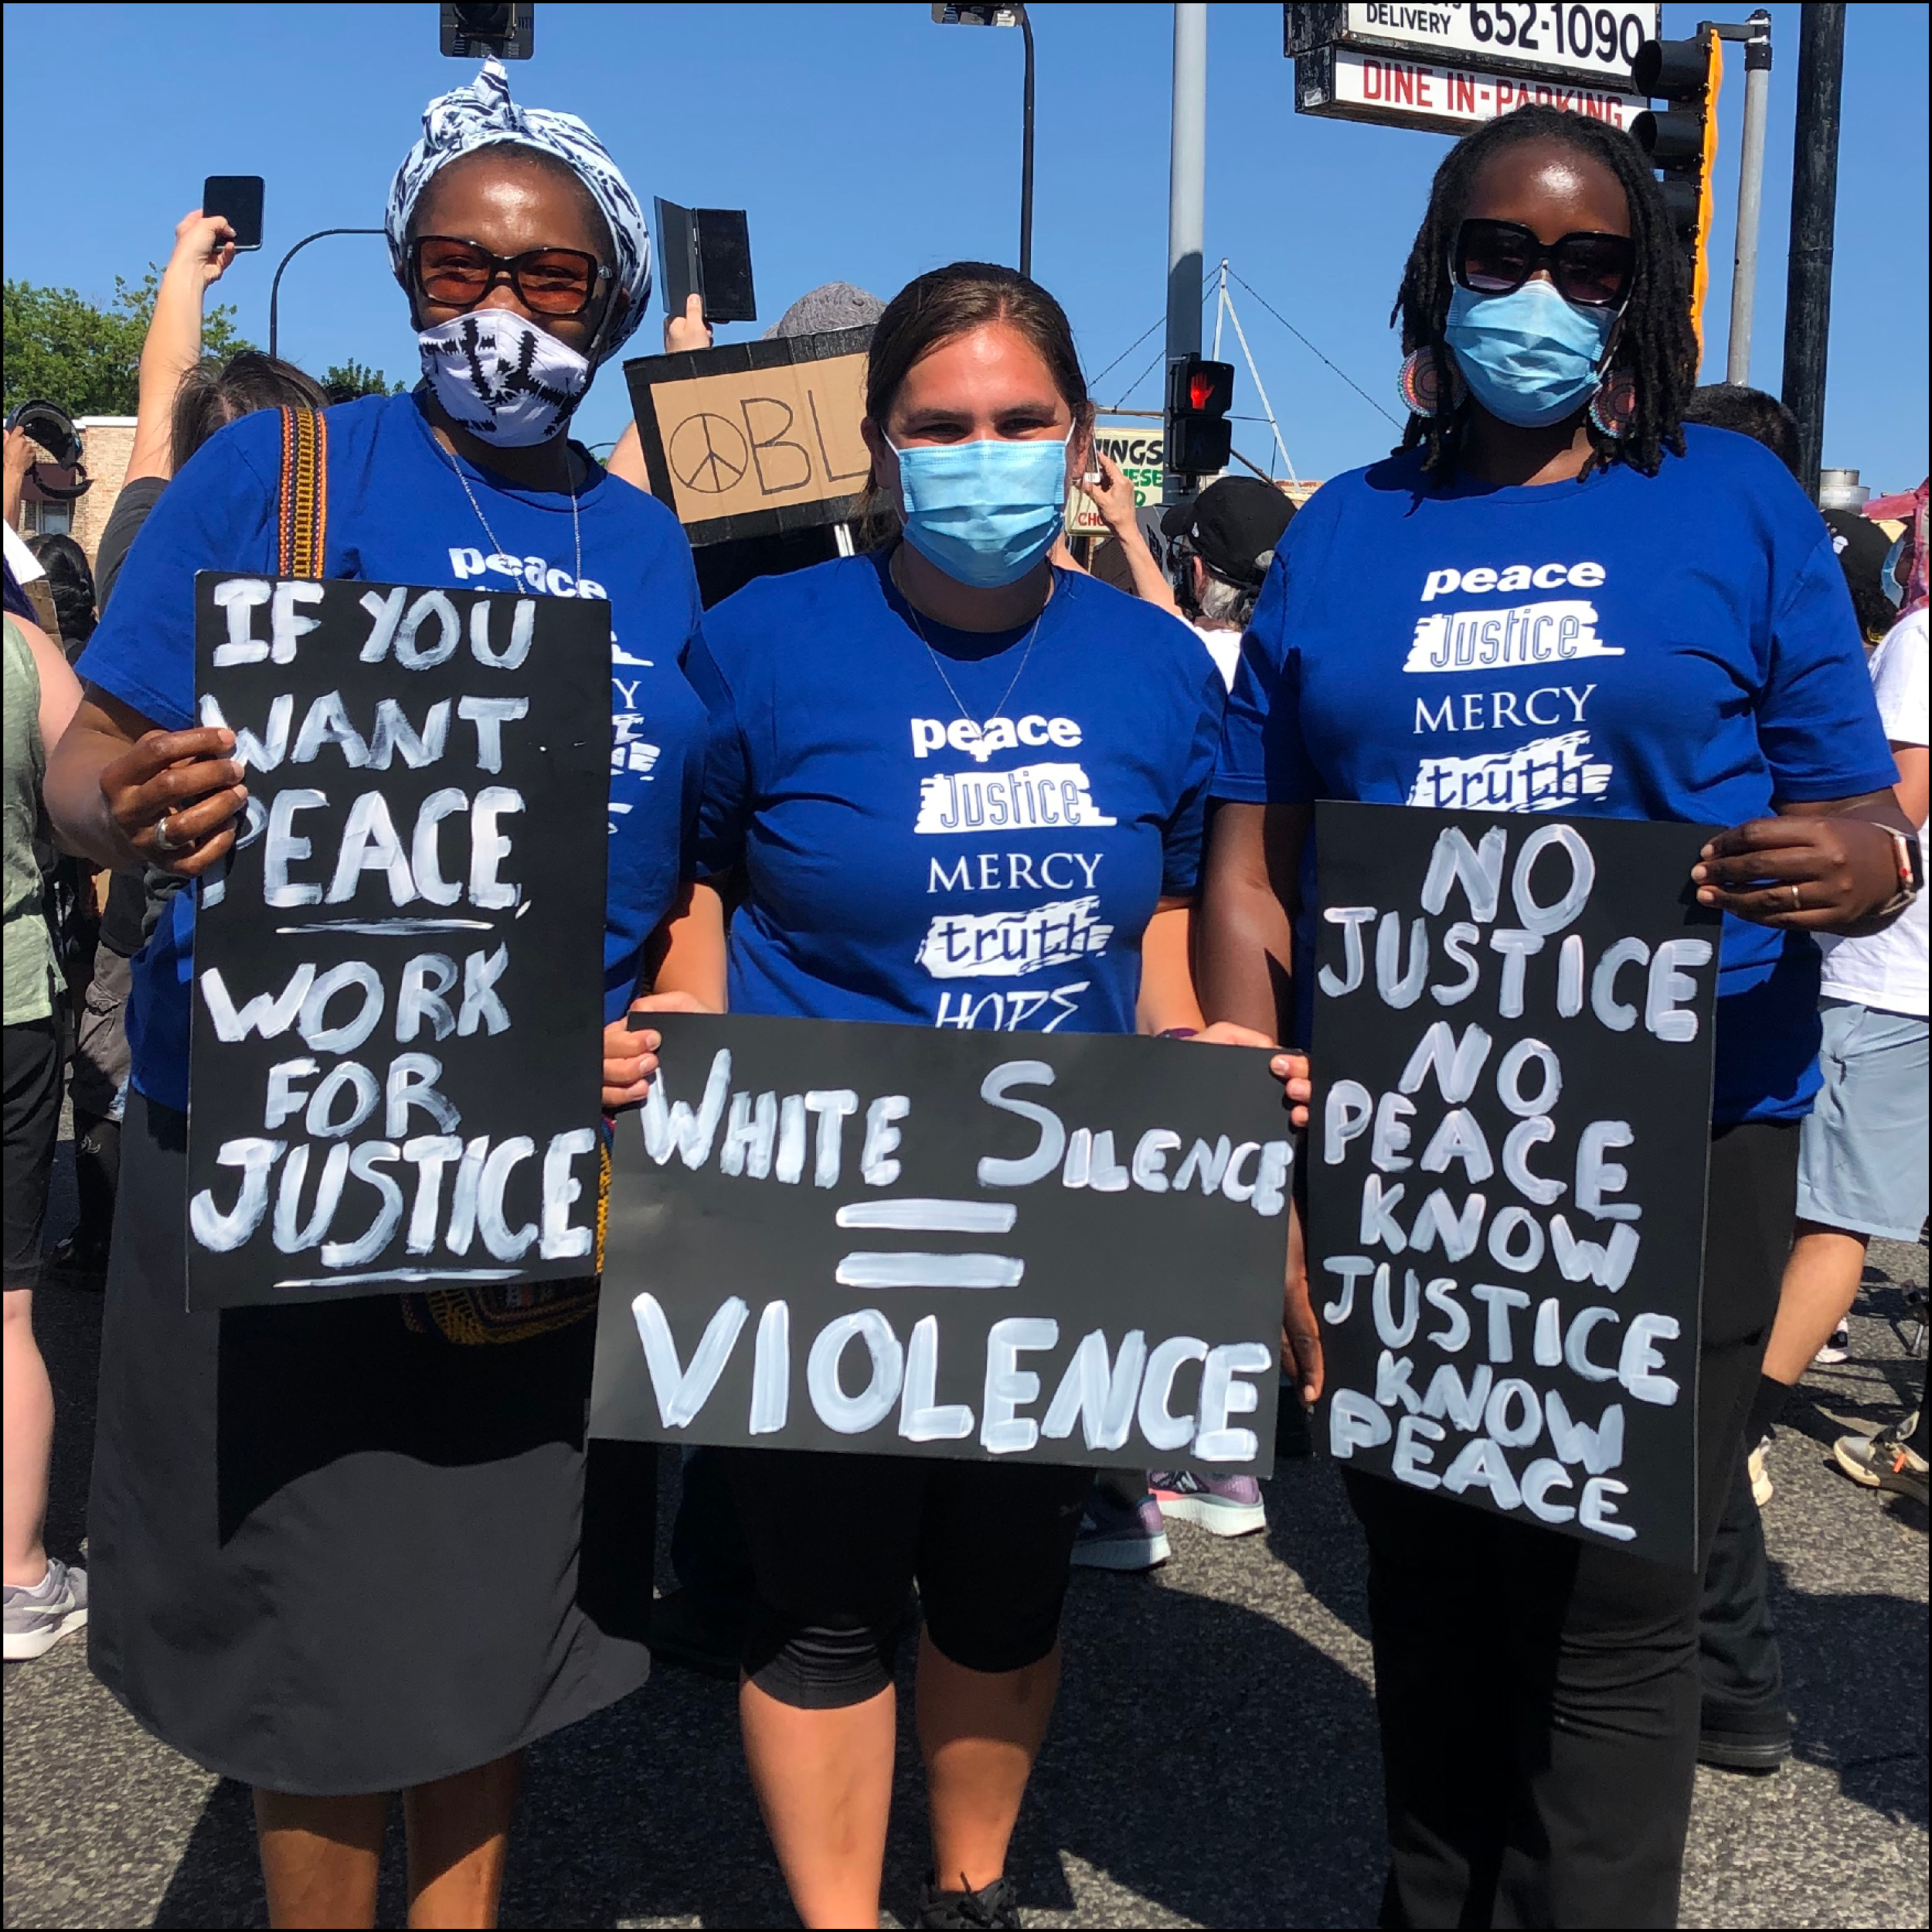 “White Silence is Violence”